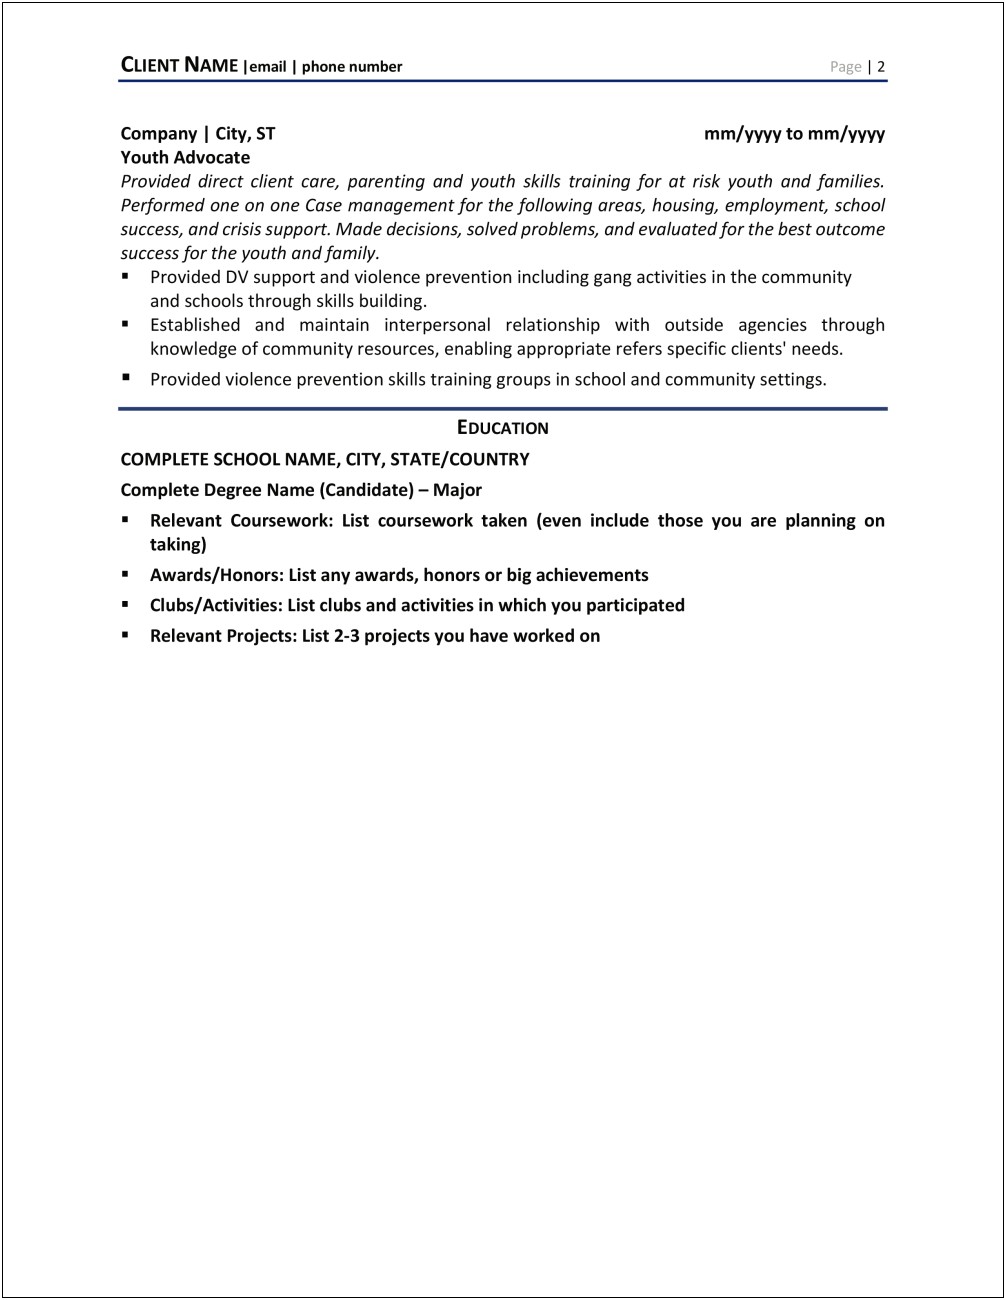 Sample Resume For Youth Development Specialist